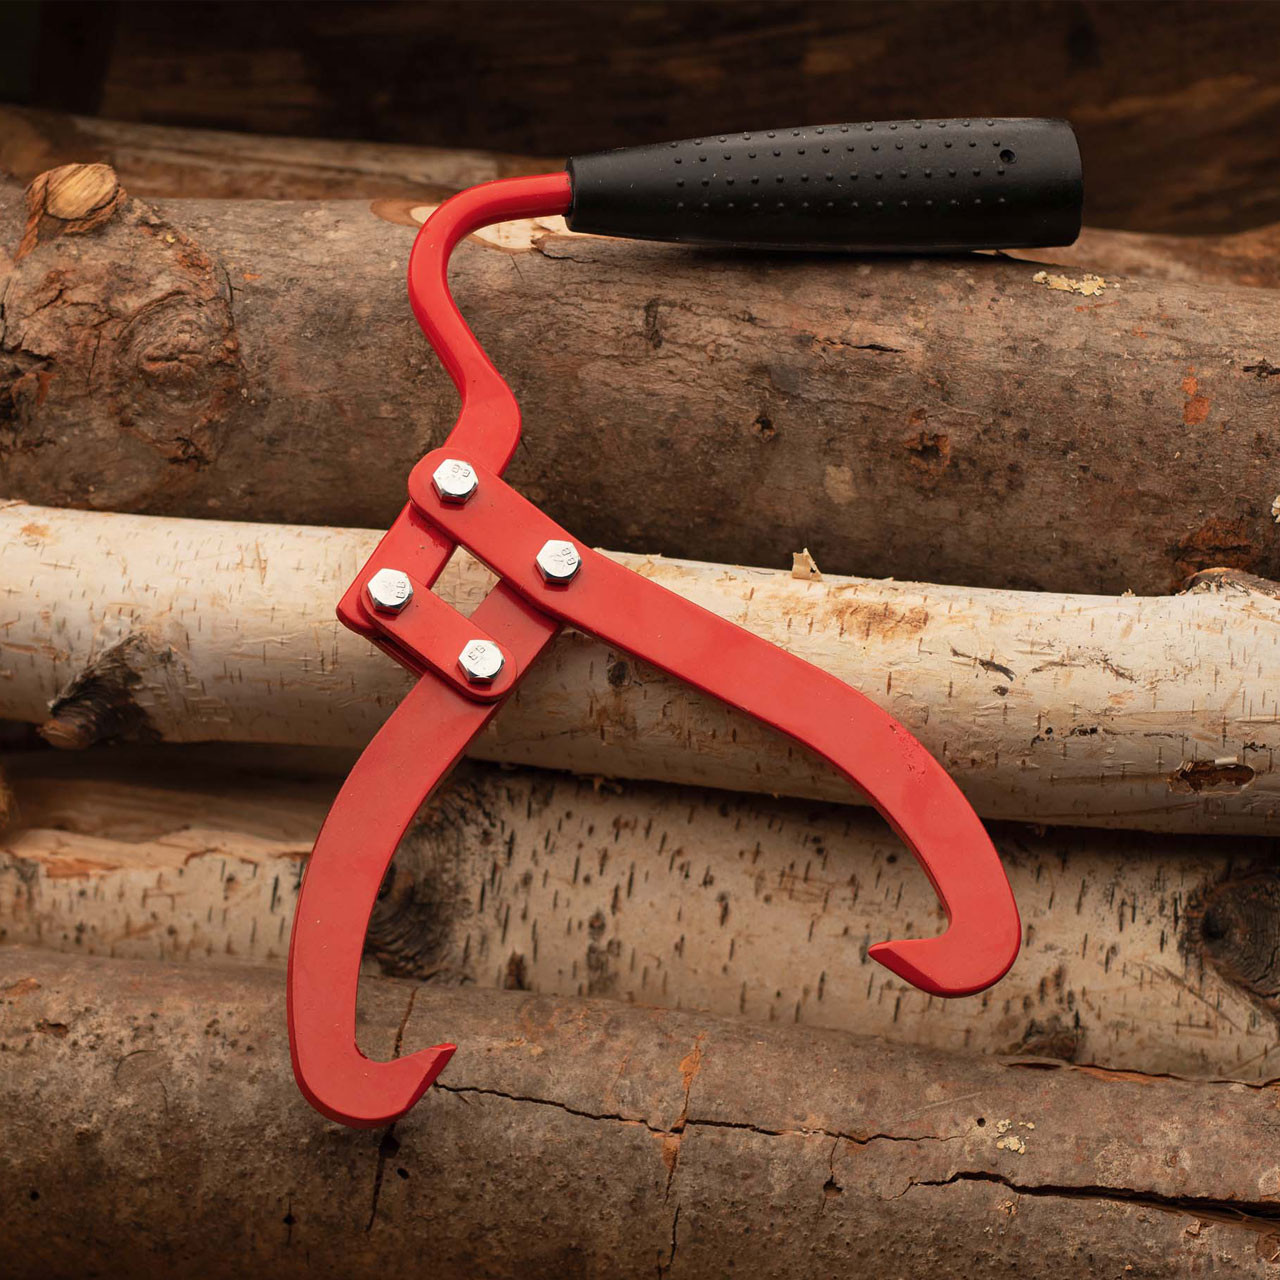 Single-handed tools: What tools are available for individuals who